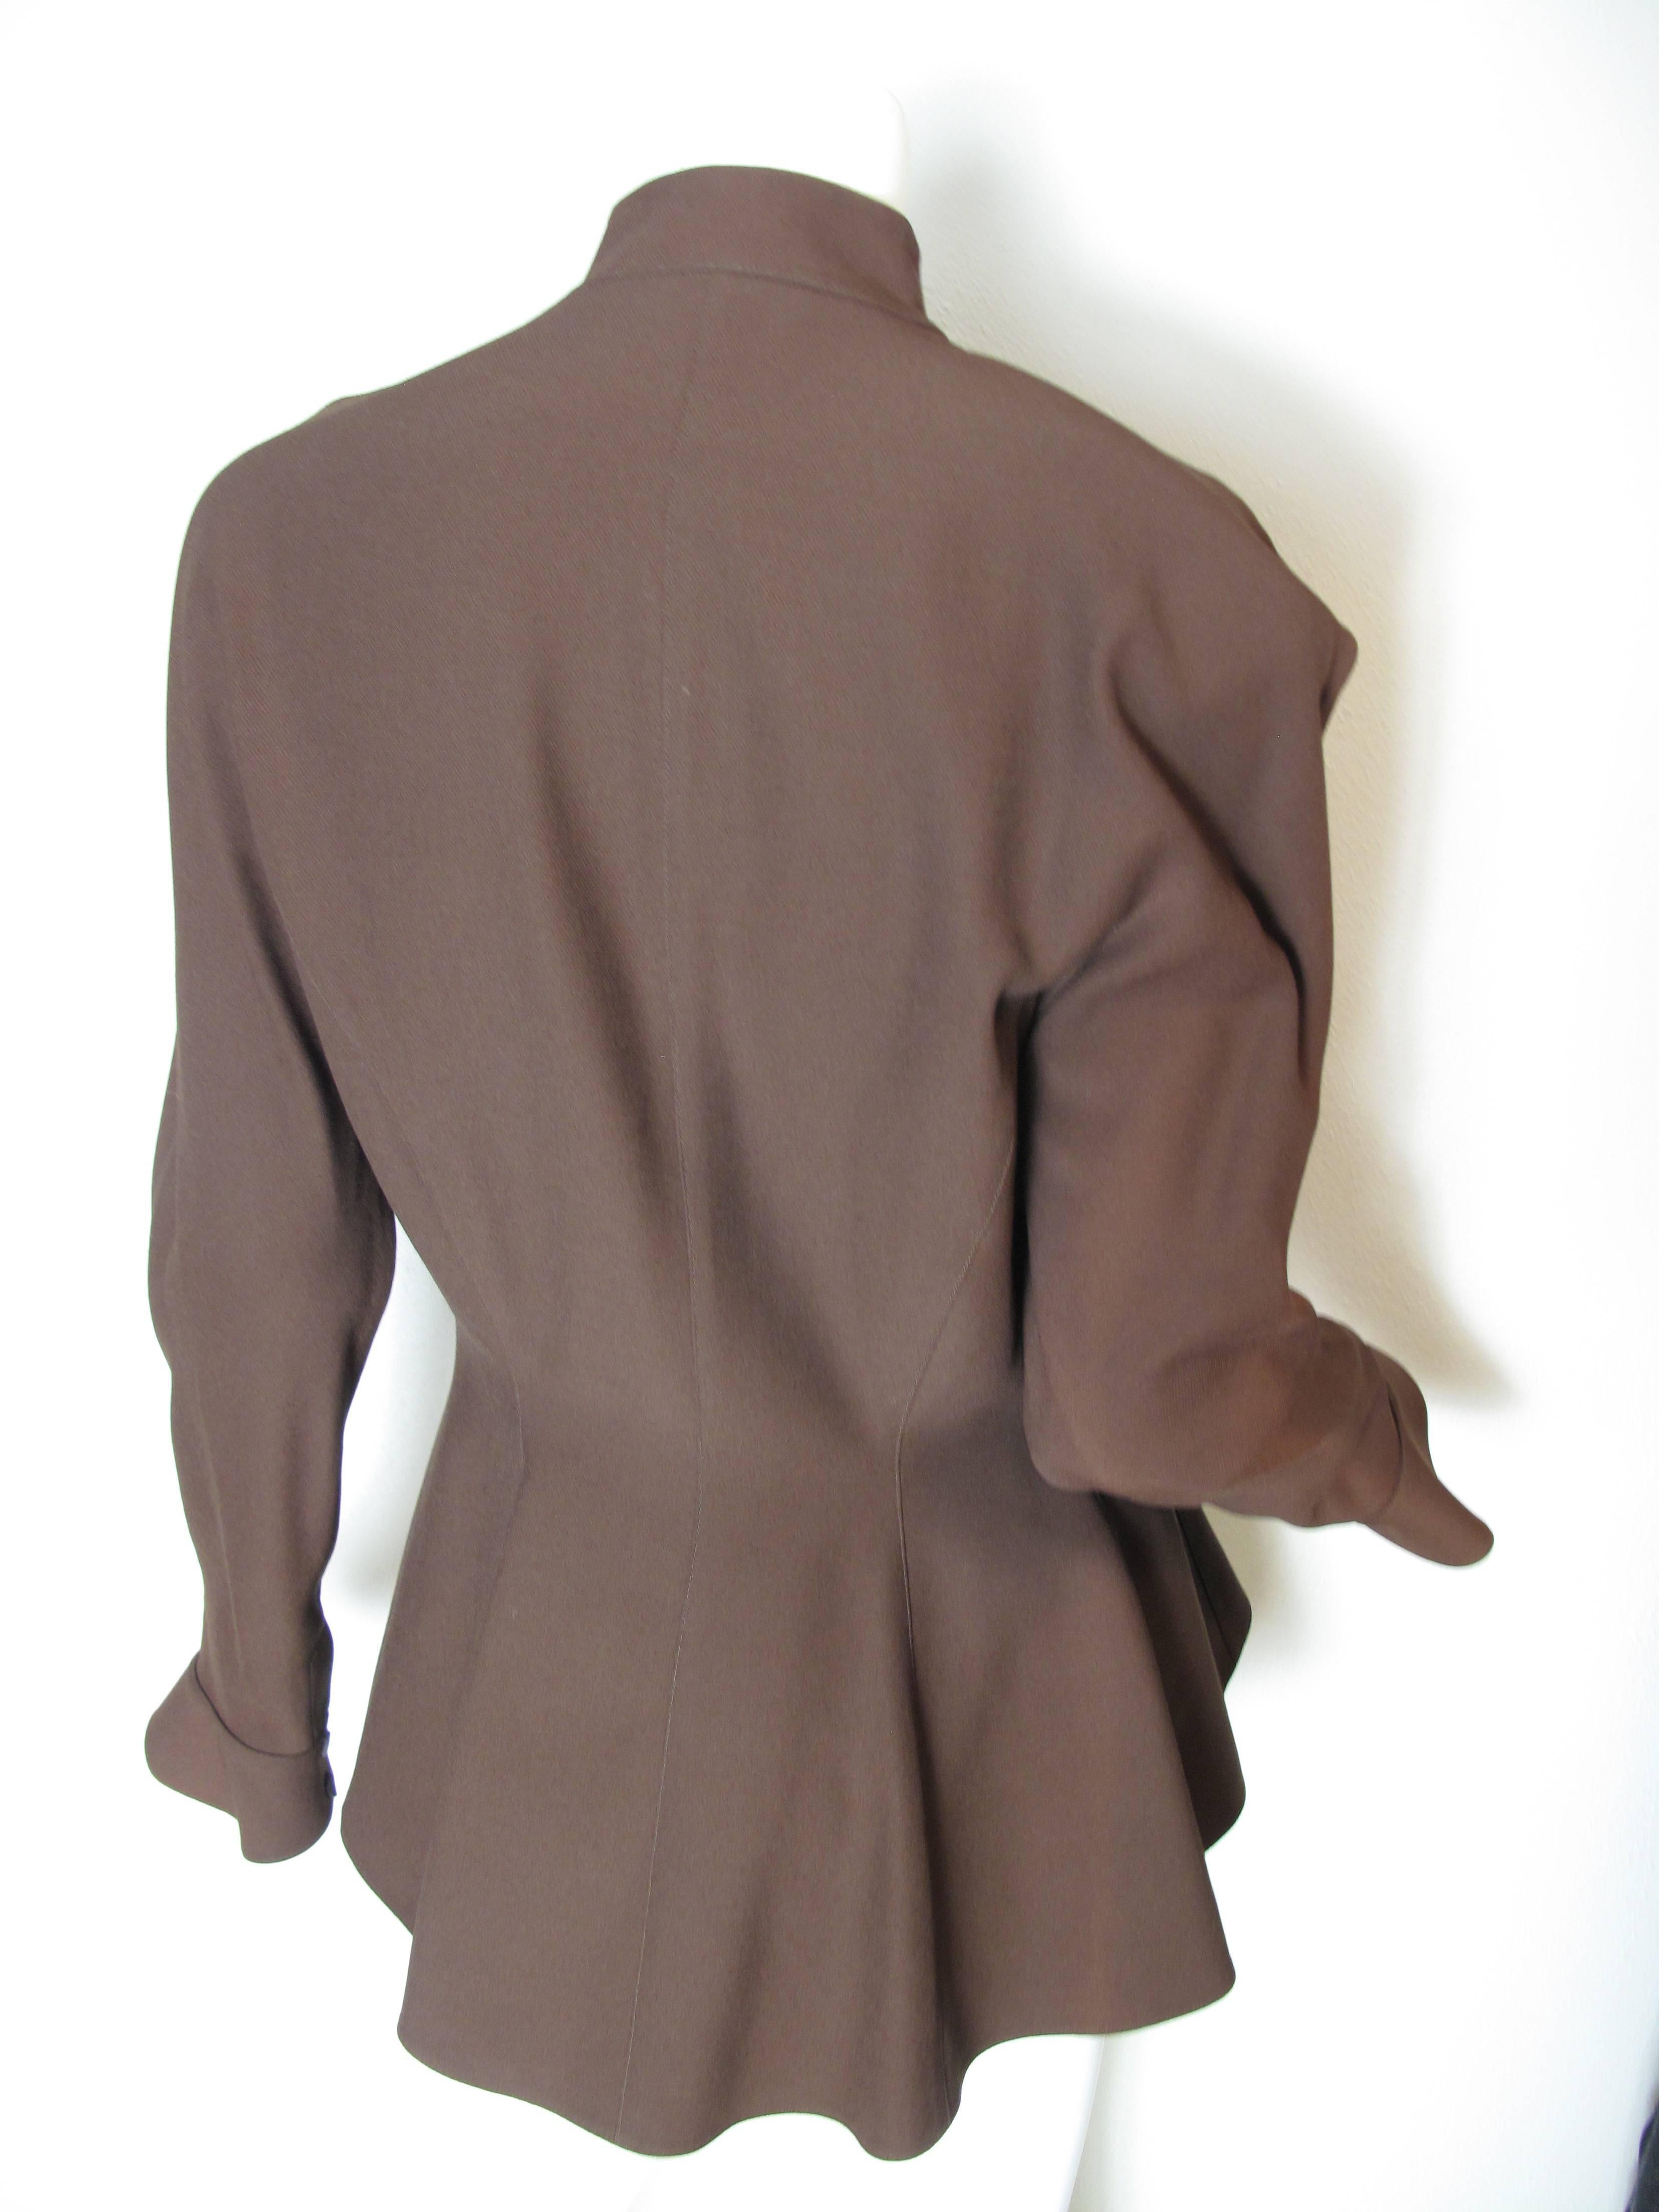 Thierry Mugler brown wool fitted blazer with interesting cuffs and collar. 
Condition: Excellent. Size 40/ US 6/8

 We accept returns for refund, please see our terms.  We offer free Ground shipping within the US.  Please let us know if you have any